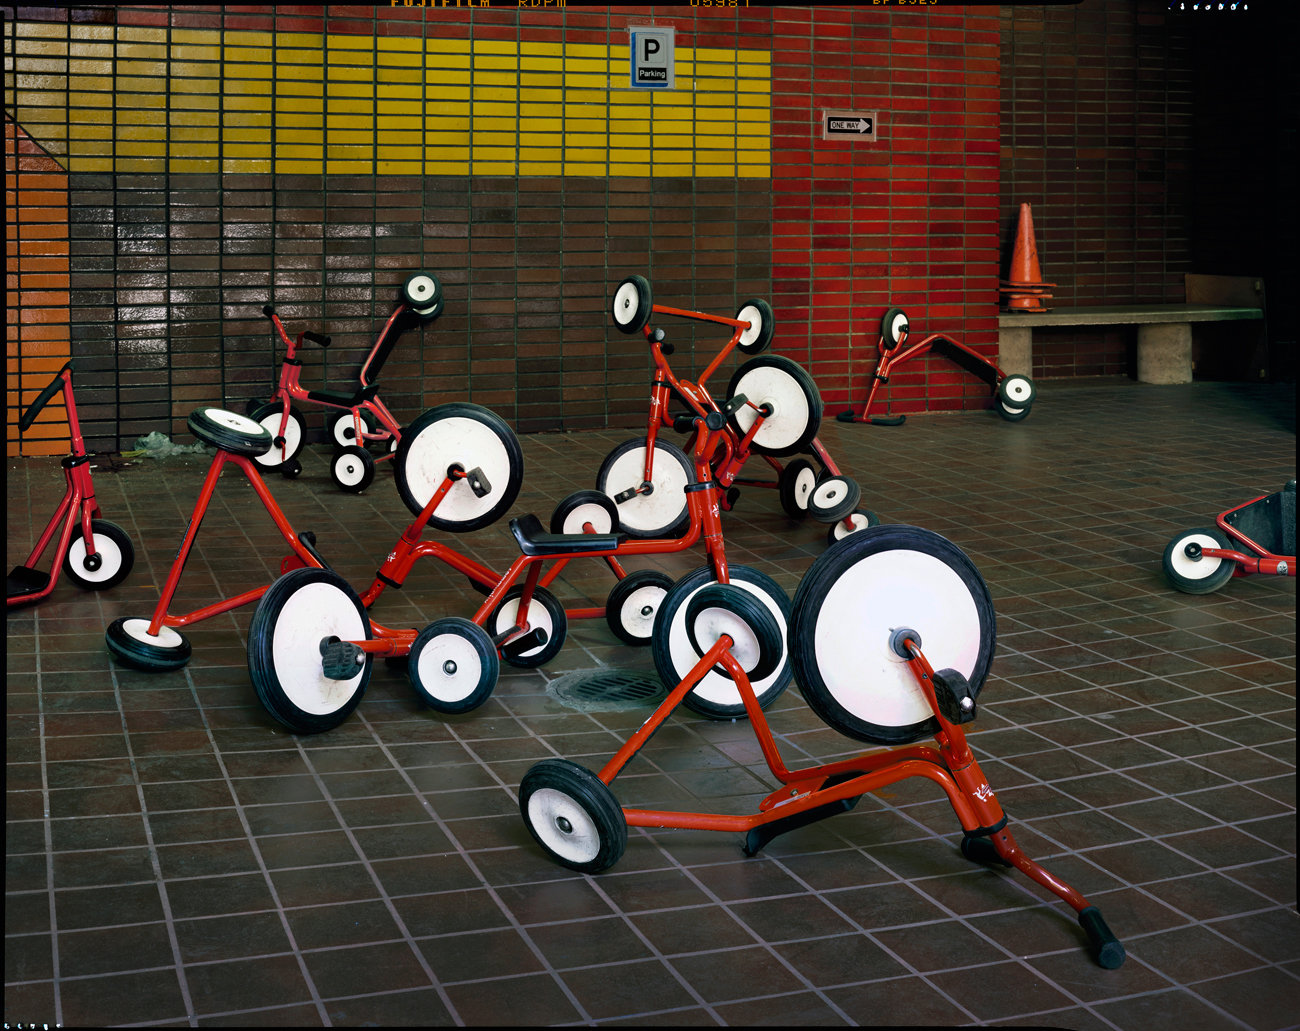 Students' tricycles, P.S. 47, New York City, 2015